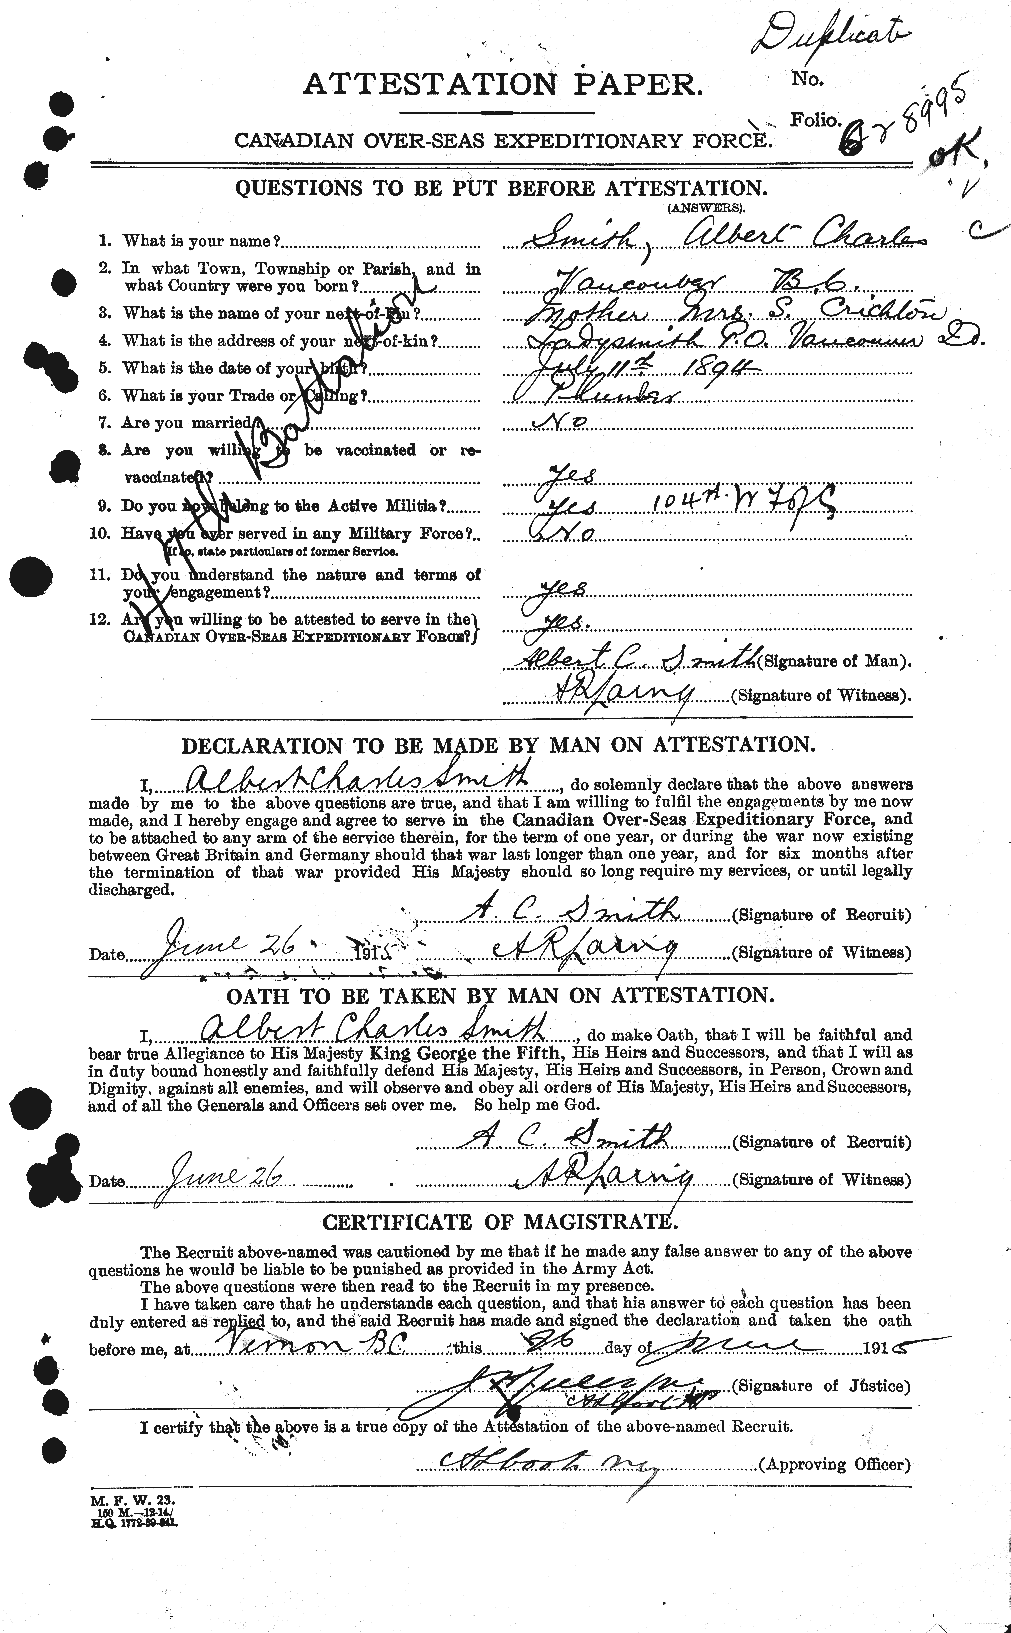 Personnel Records of the First World War - CEF 098958a